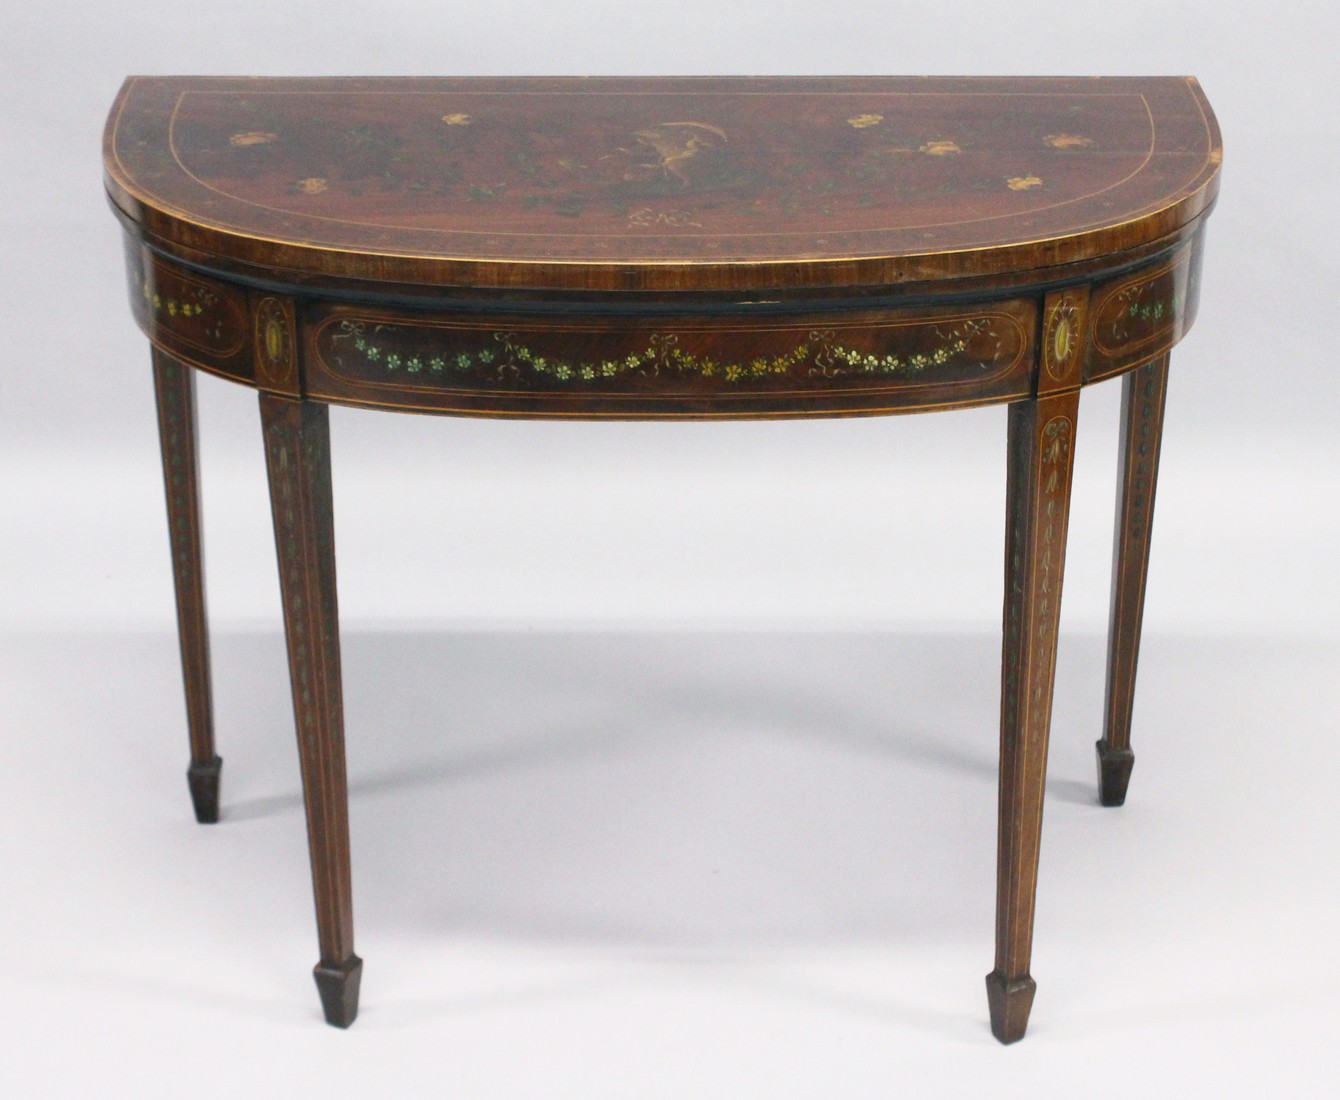 A GEORGIAN SHERATON REVIVAL MAHOGANY CARD TABLE painted with garlands and flowers with banded top